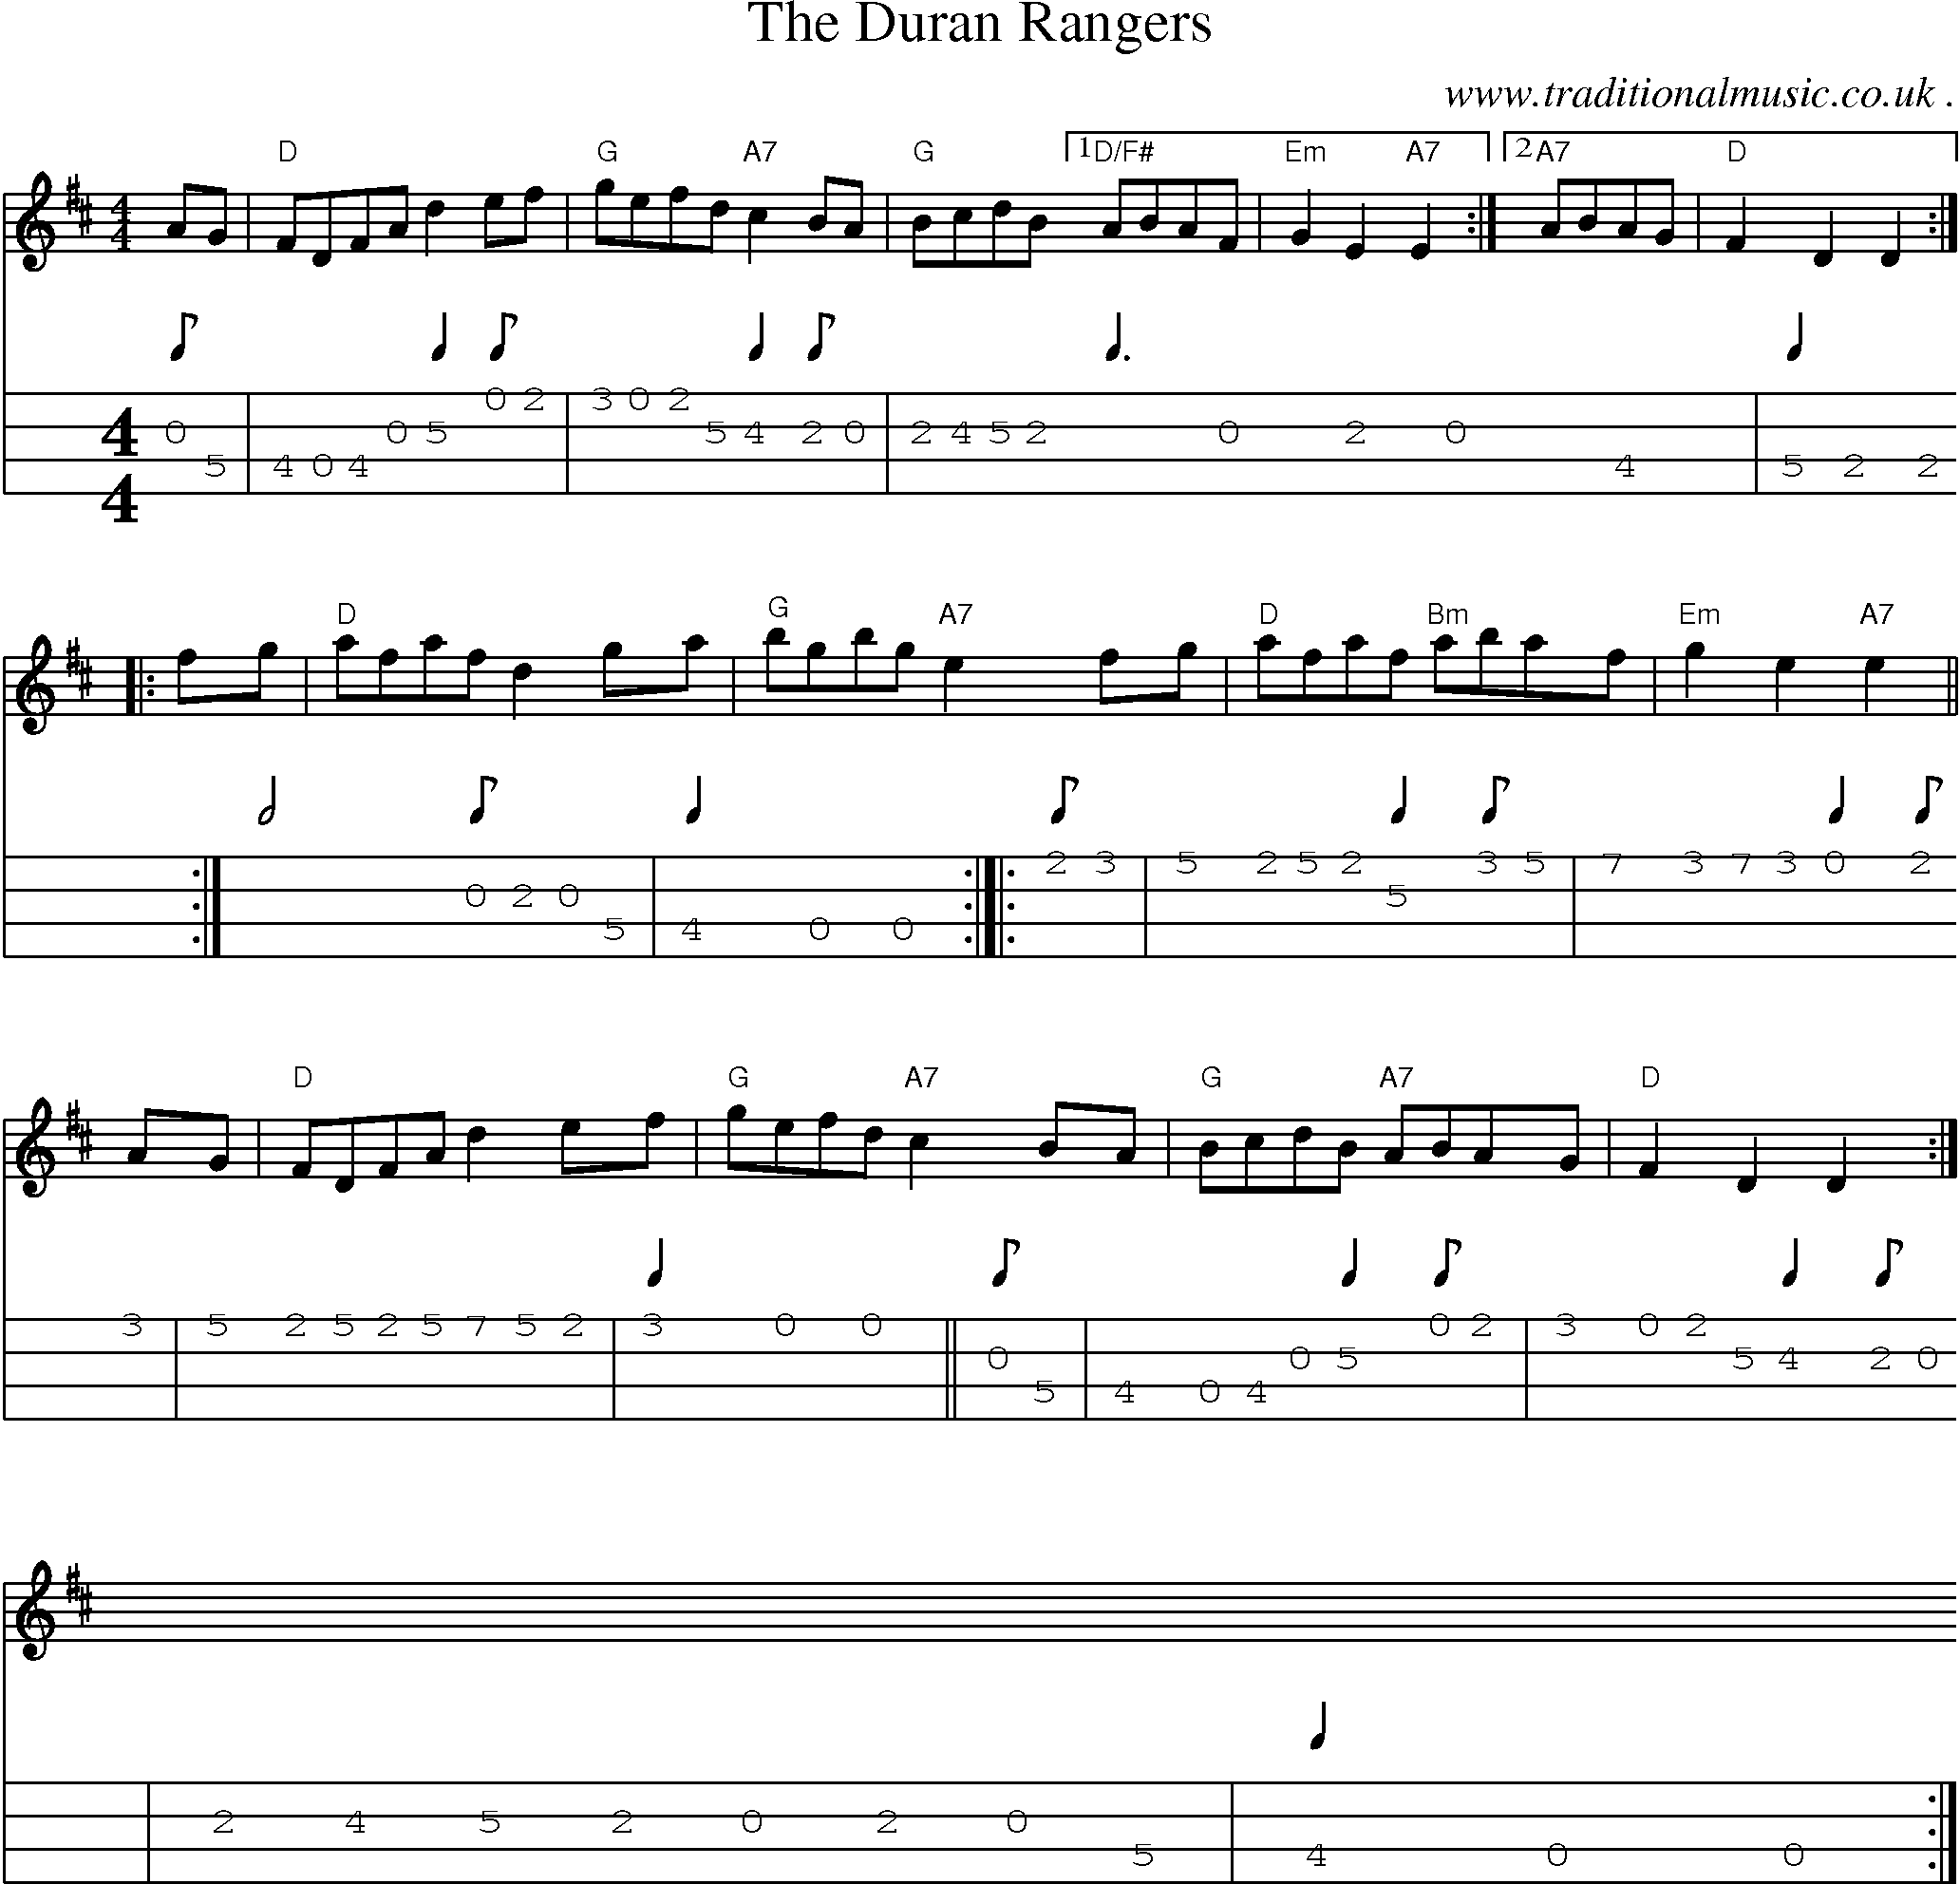 Sheet-music  score, Chords and Mandolin Tabs for The Duran Rangers